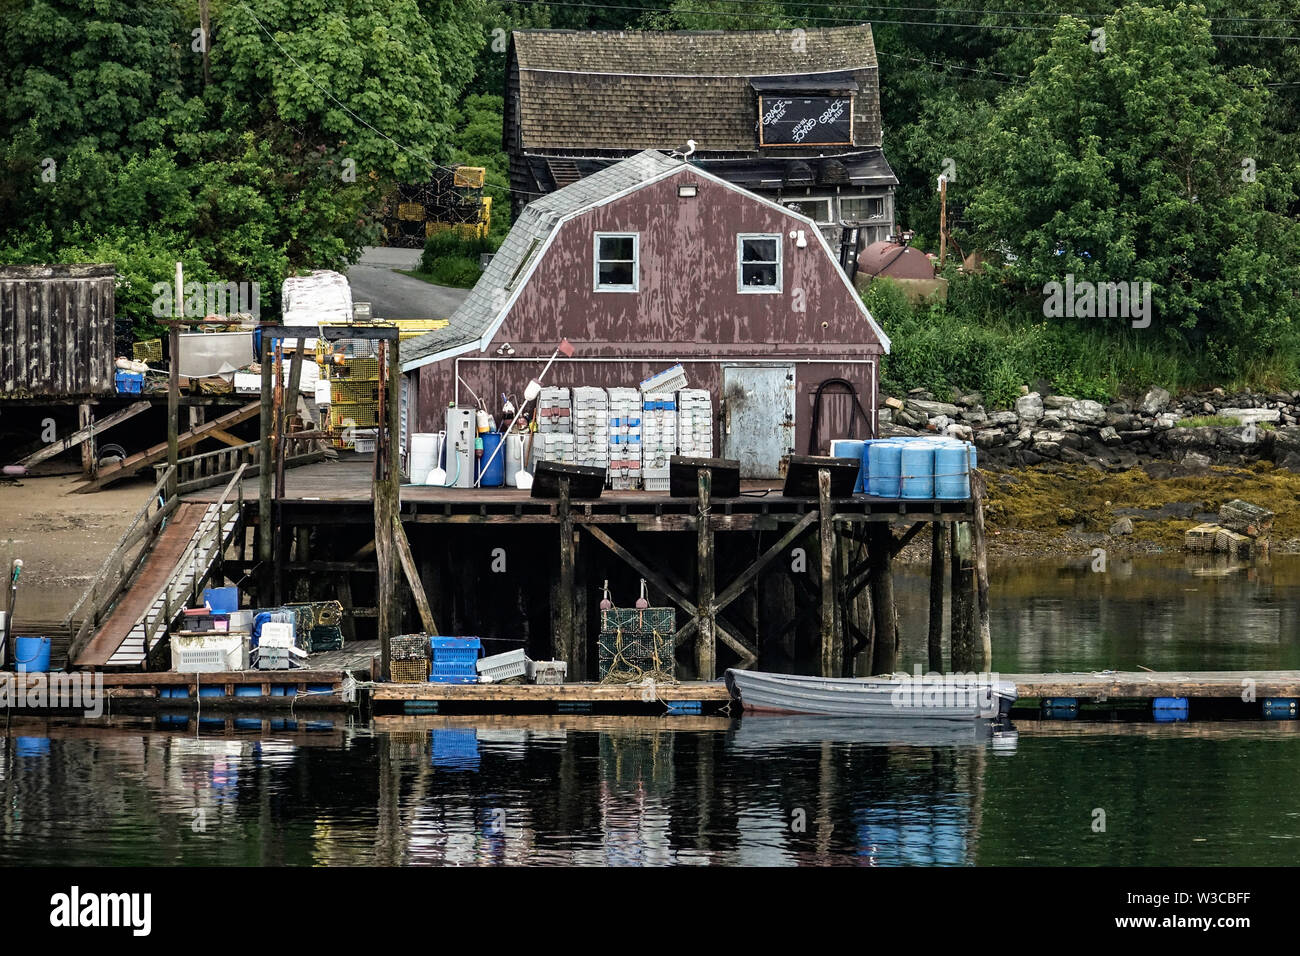 Glens Lobster Wharf on Mackerel Cove, Bailey Island on a summers day in Harpswell, Maine. Stock Photo